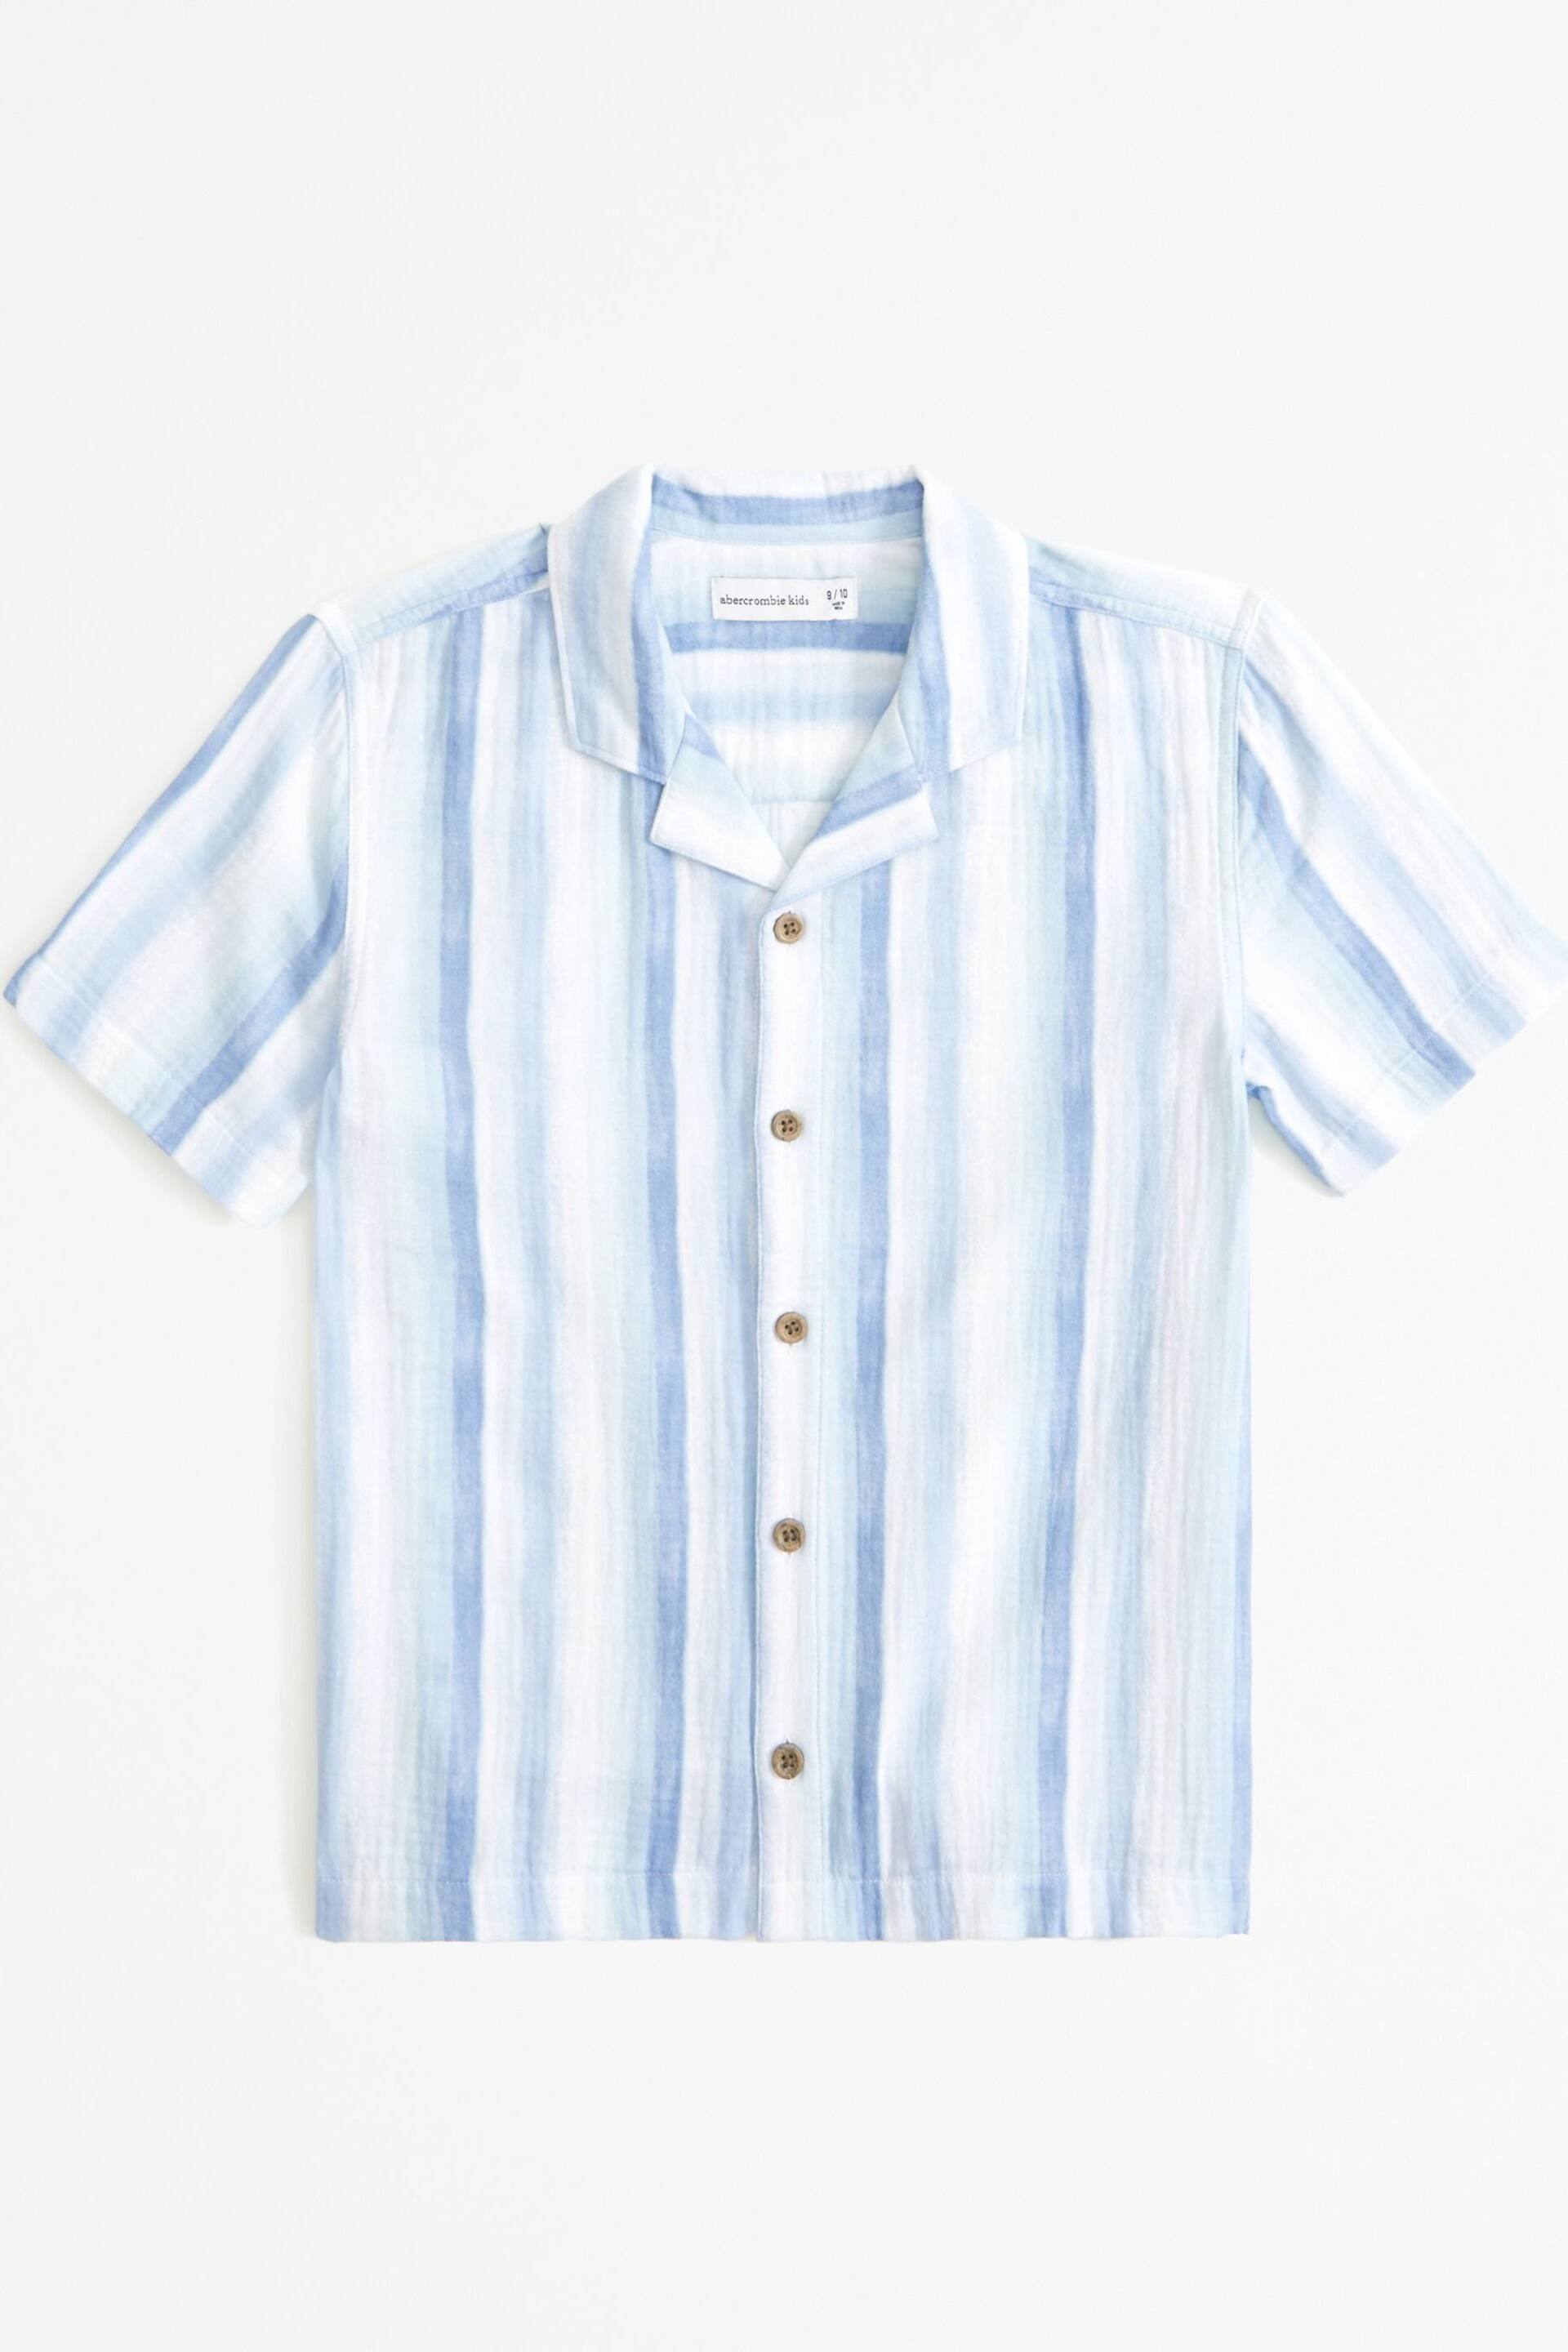 Abercrombie & Fitch Short Sleeve Crinkle Stripe White Shirt - Image 7 of 7